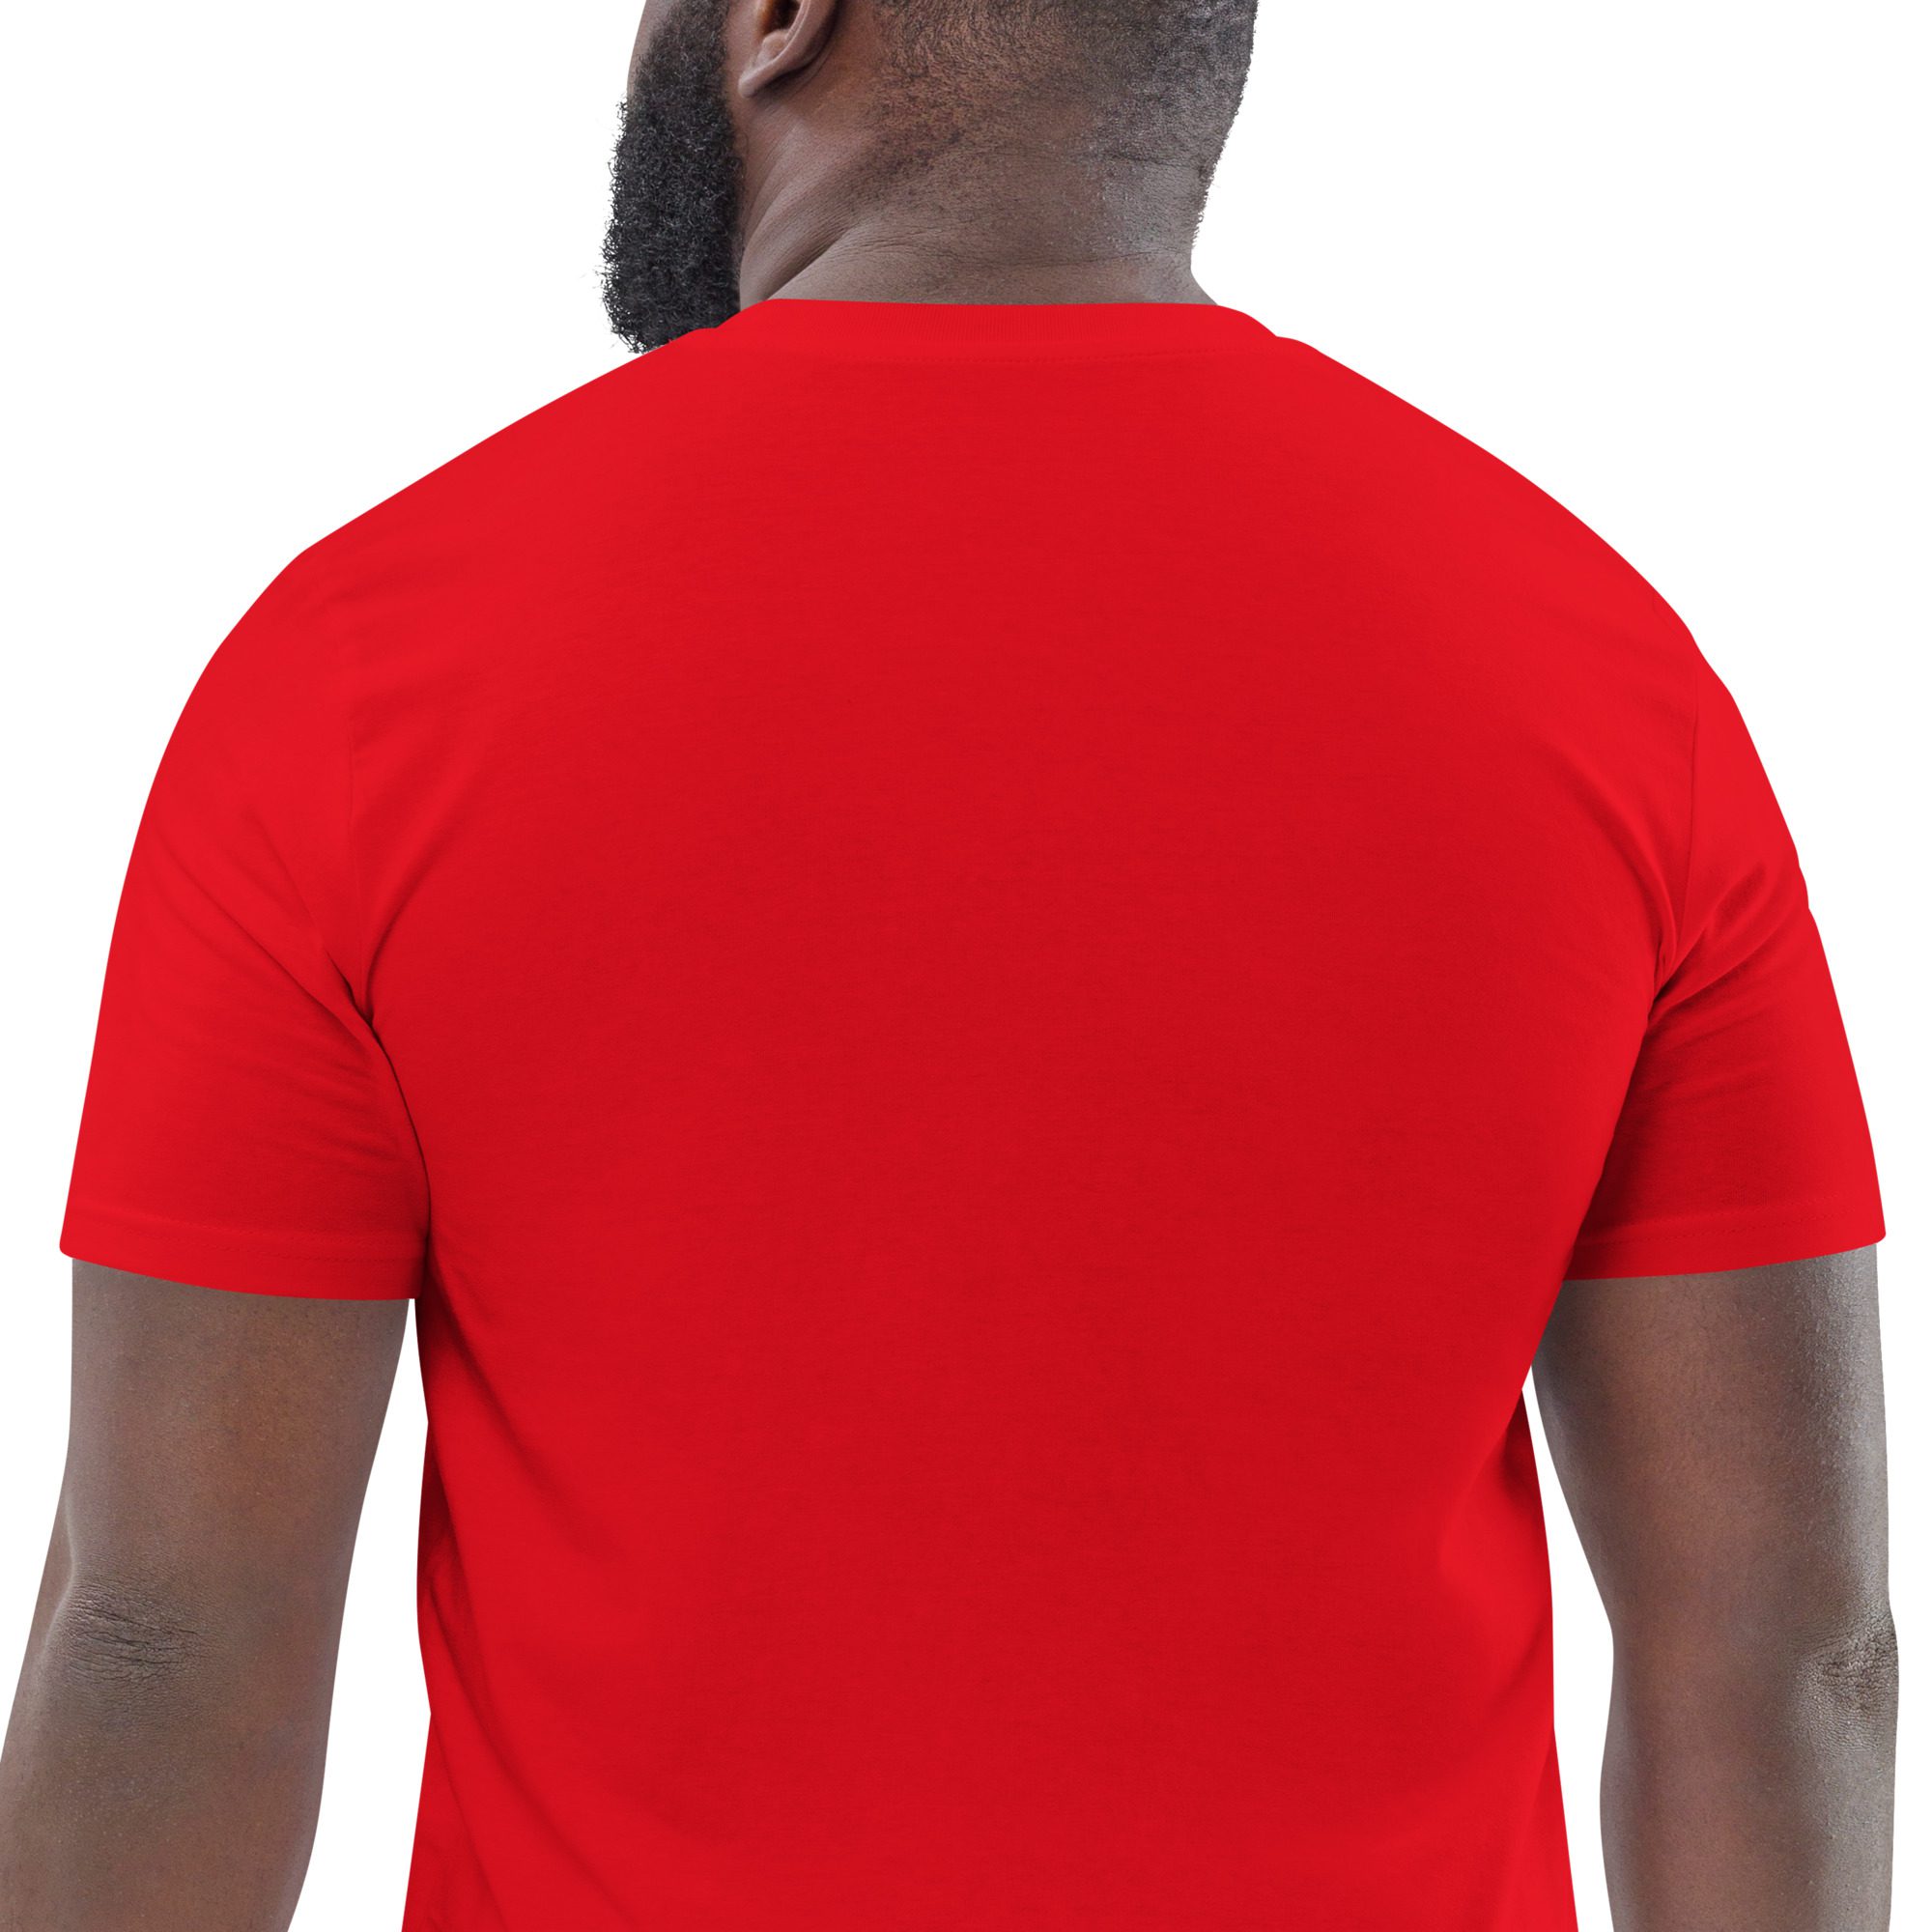 unisex organic cotton t shirt red zoomed in 651ada938c417